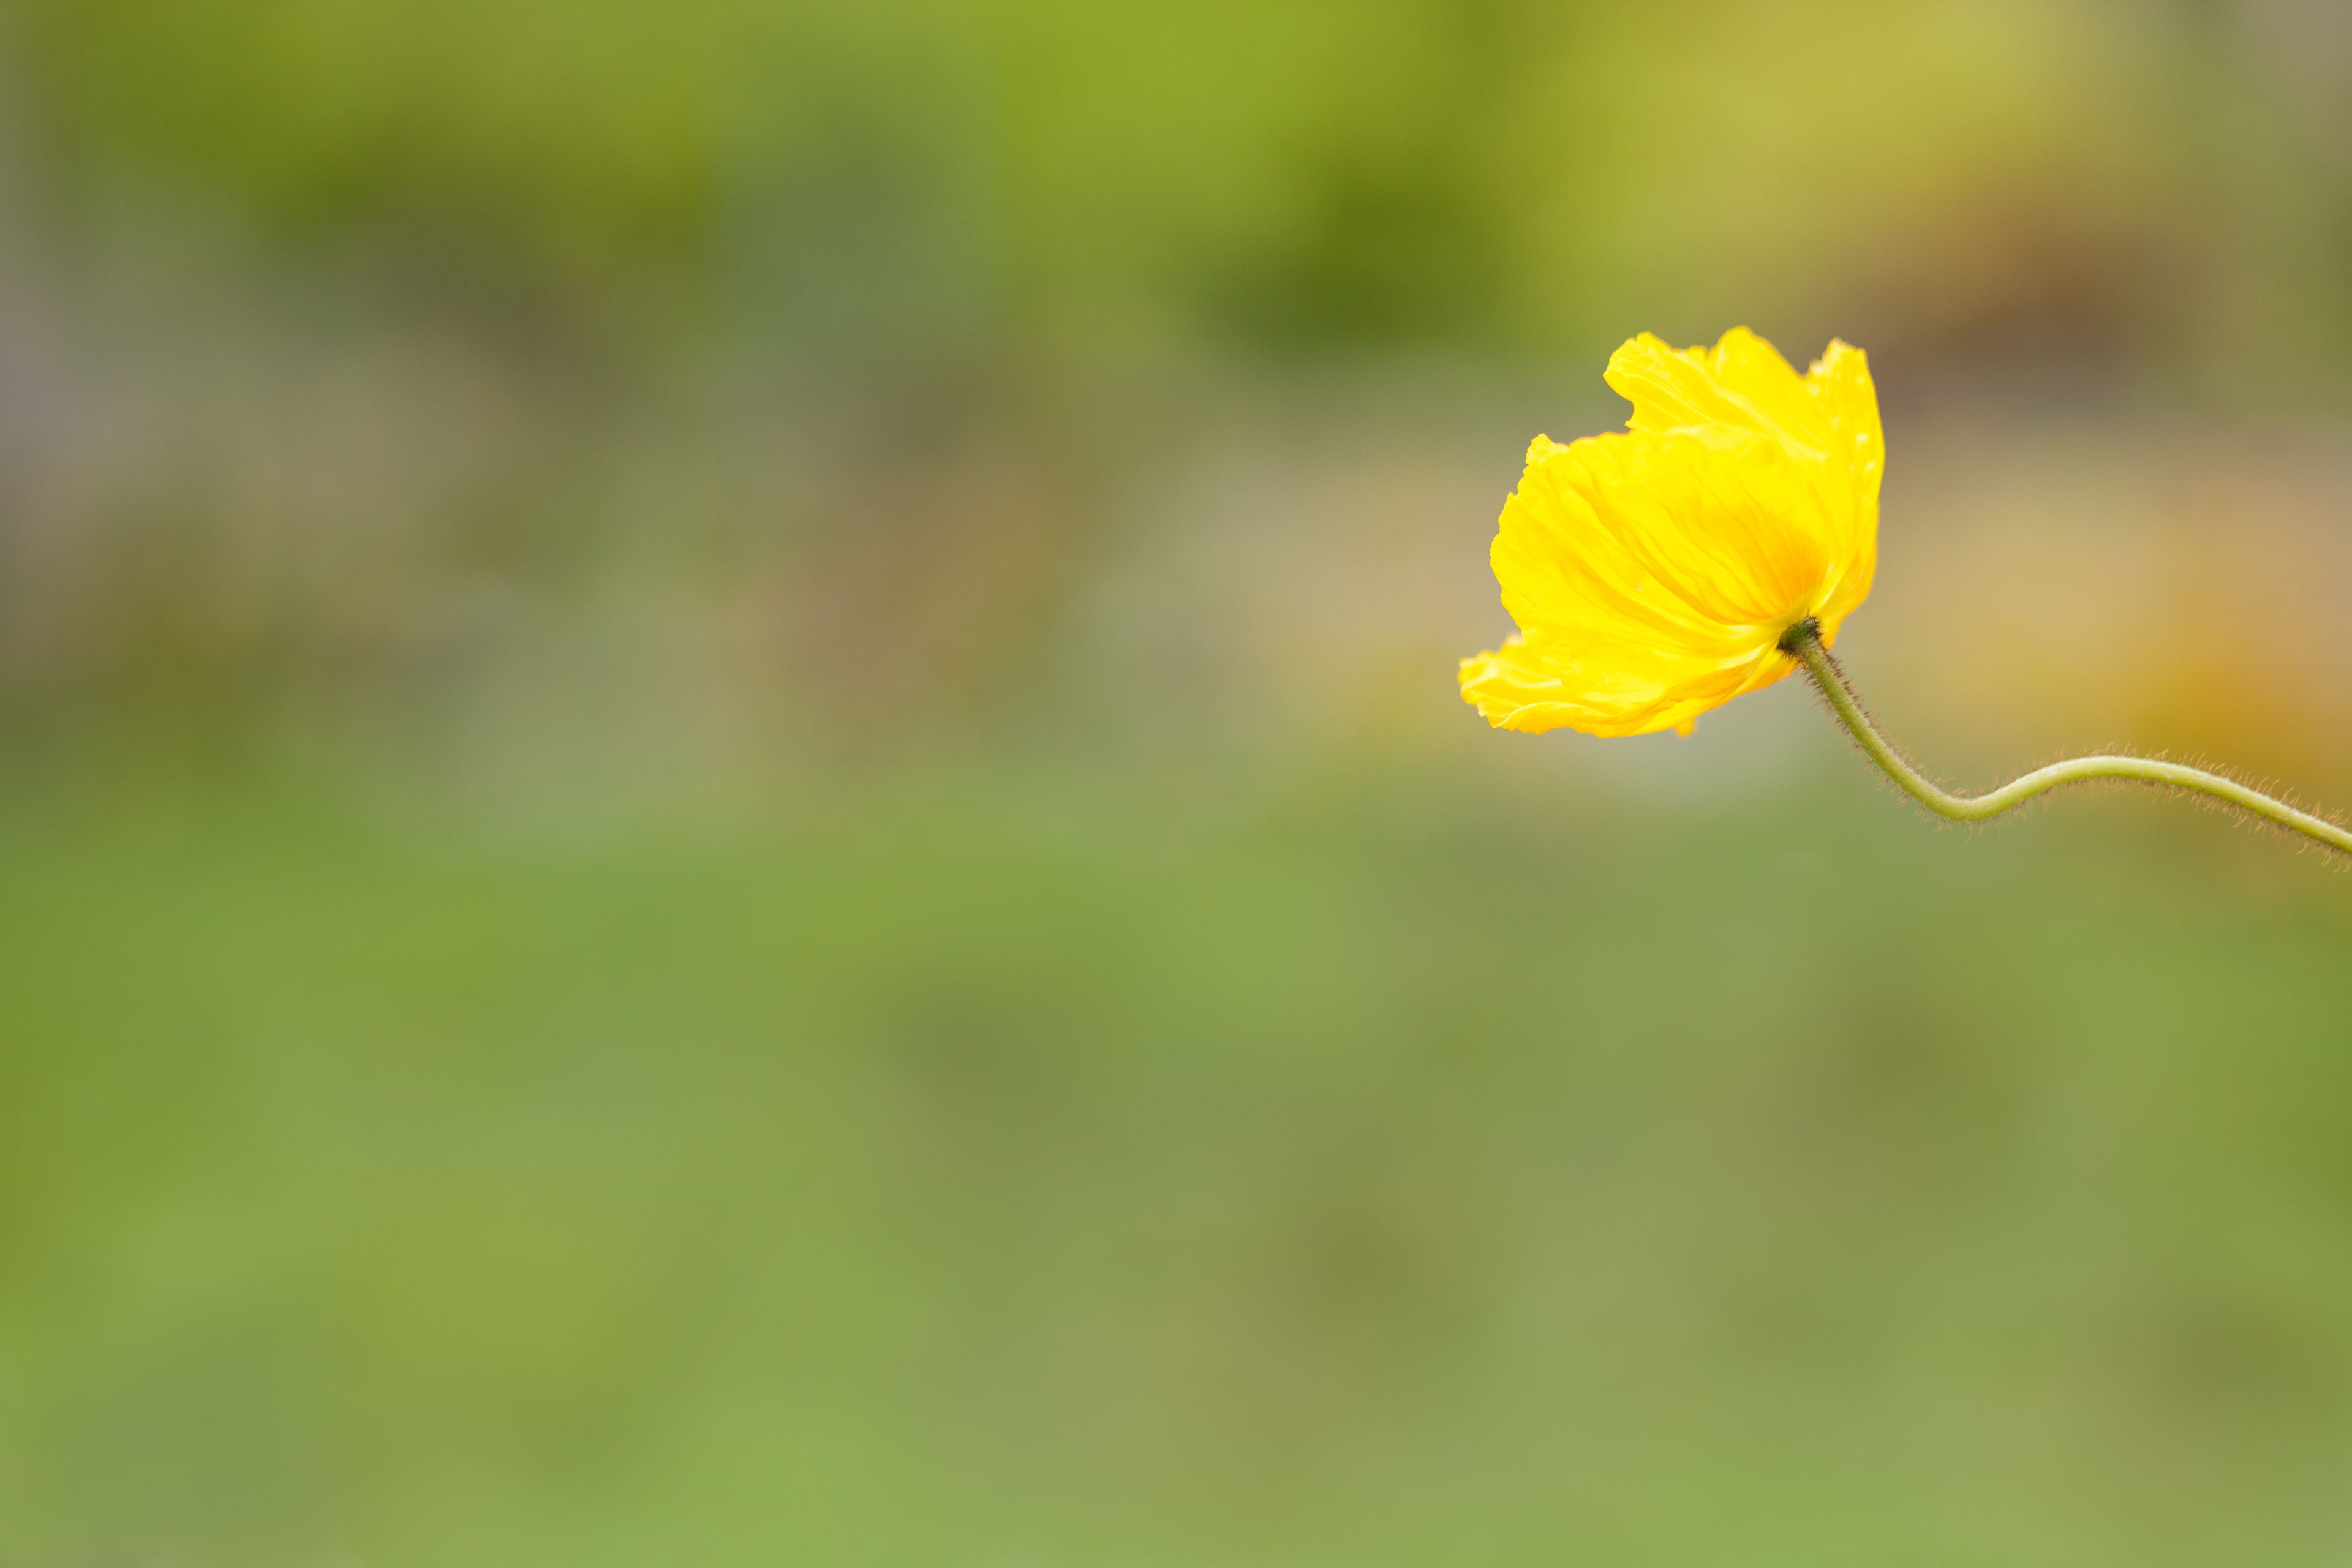 A flower with small yellow petals.